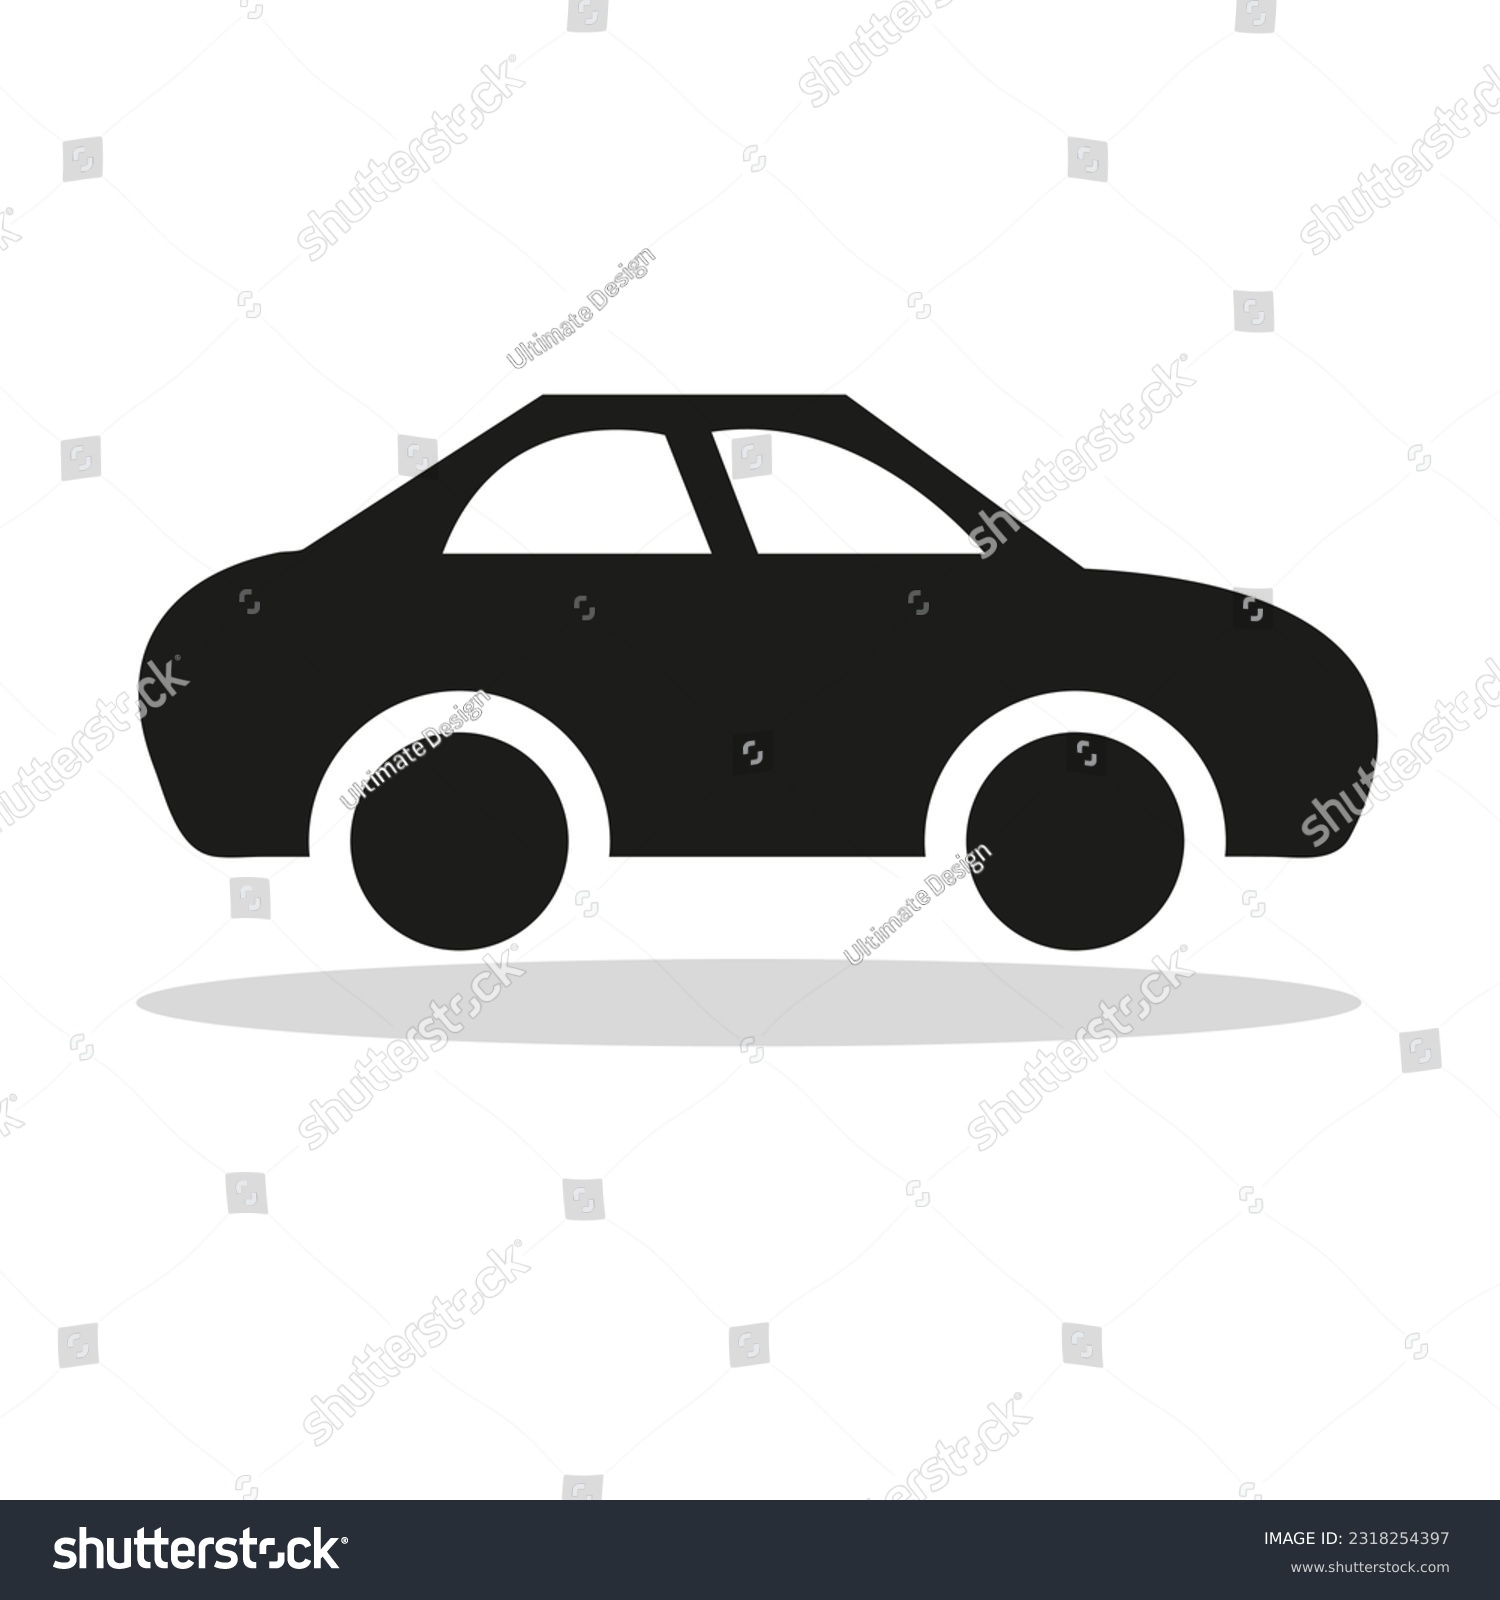 SVG of car vector,Car. monochrome icon,Coupe Car Icon,car icon,Vector car Icon,car icon vector isolated illustration svg